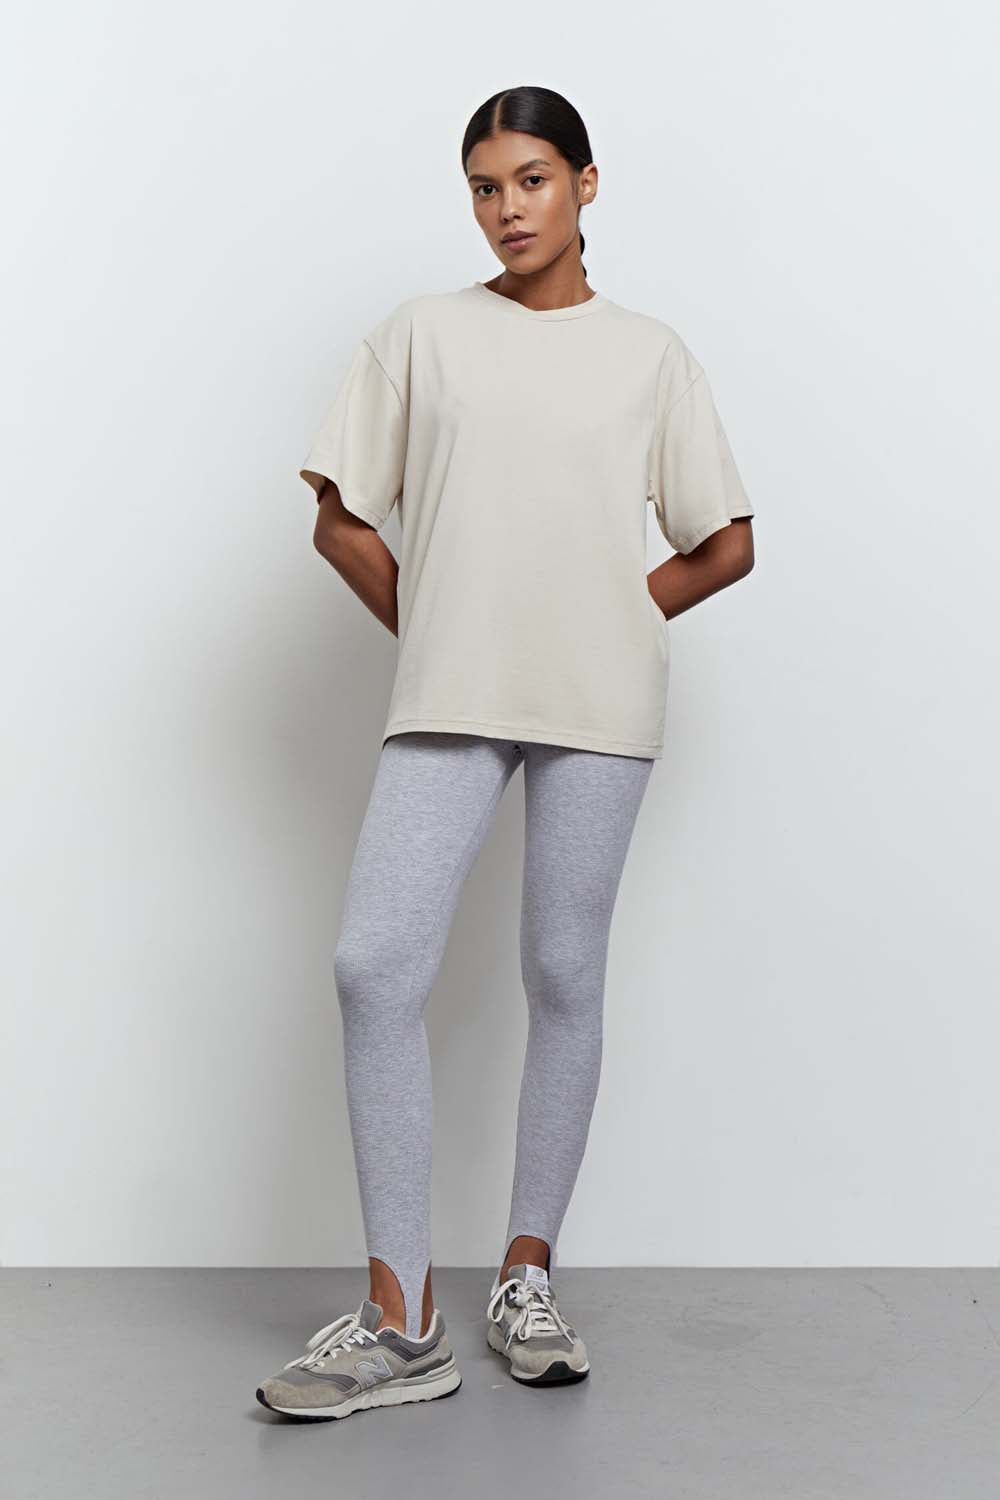 Essential T-Shirt Oversized in Creamy